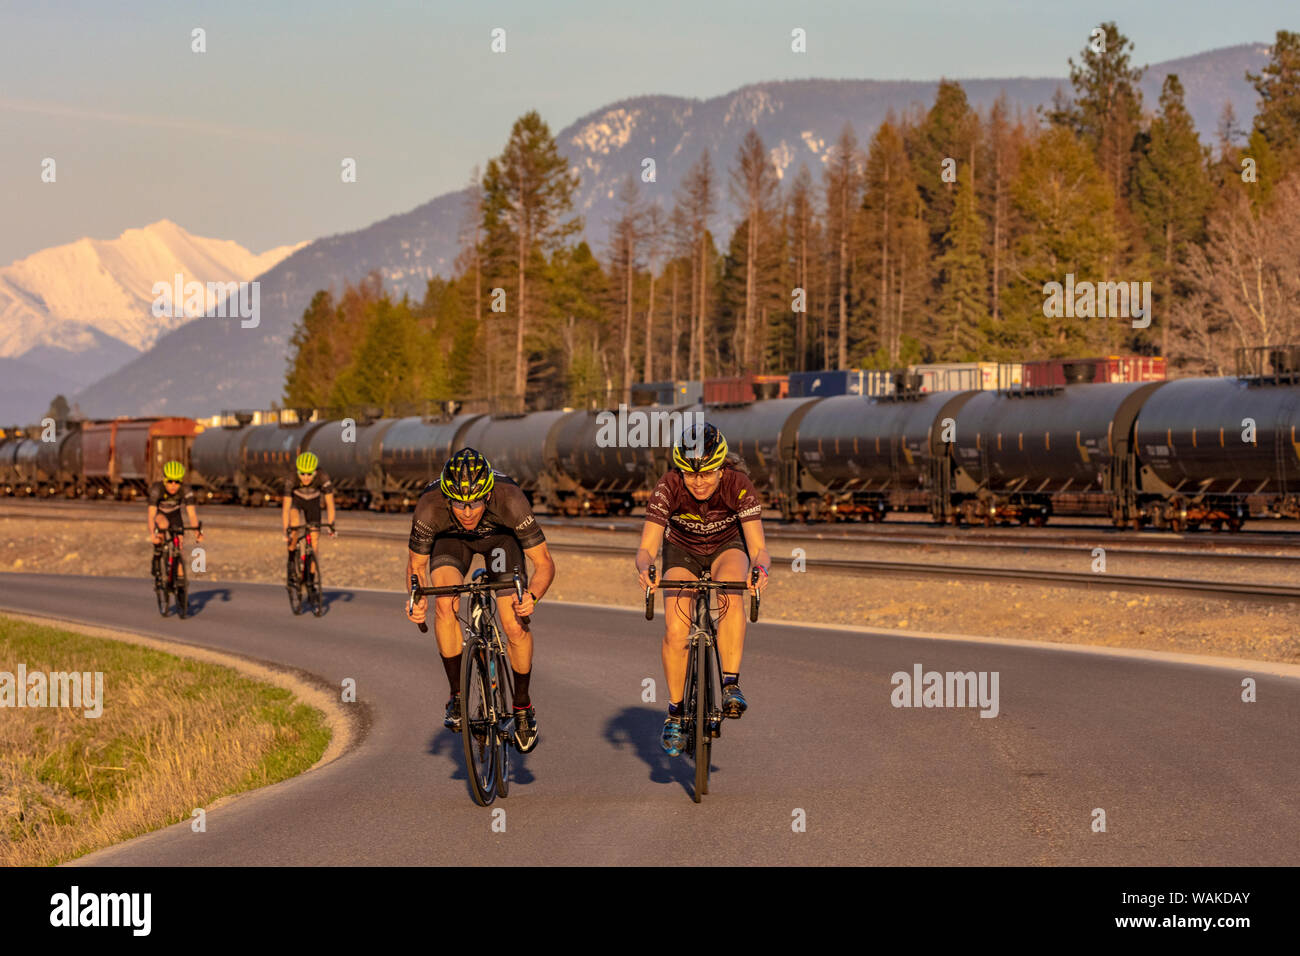 Family road bicycling on Edgewood Road with Great Northern Mountain and railyard in the background in Whitefish, Montana, USA (MR) Stock Photo